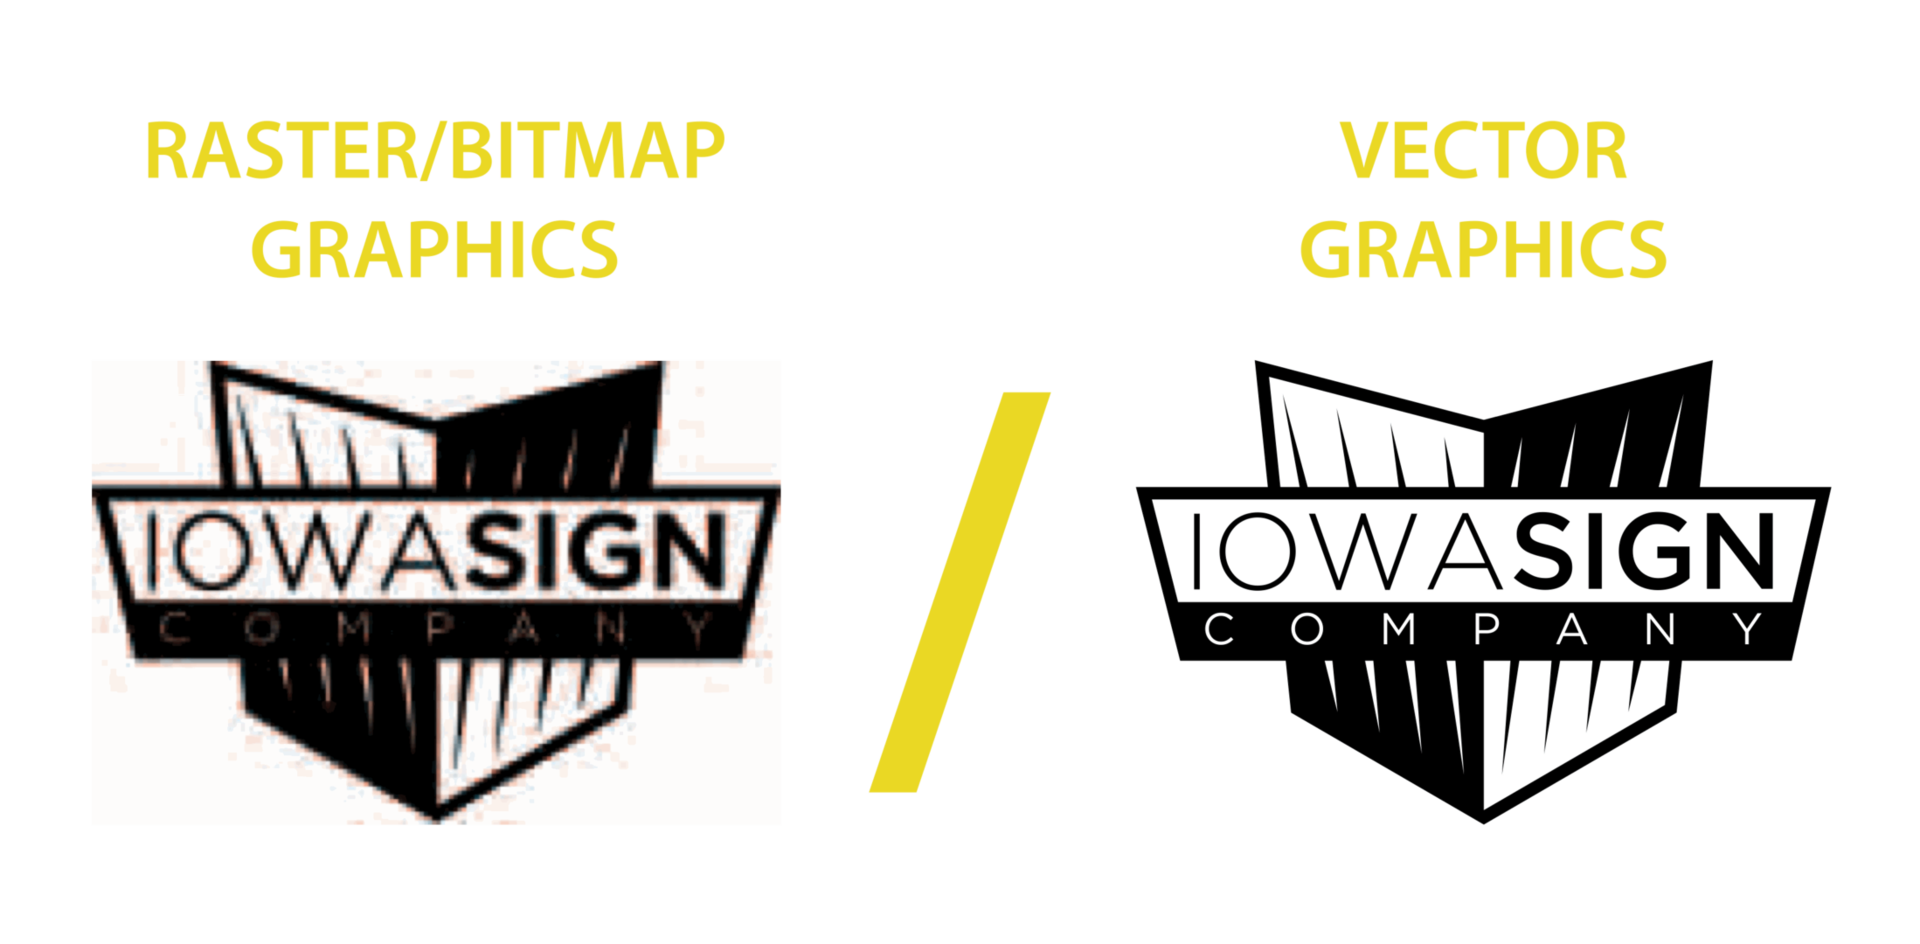 An image with our company logo in both raster and vector format explaining the differences between the two.